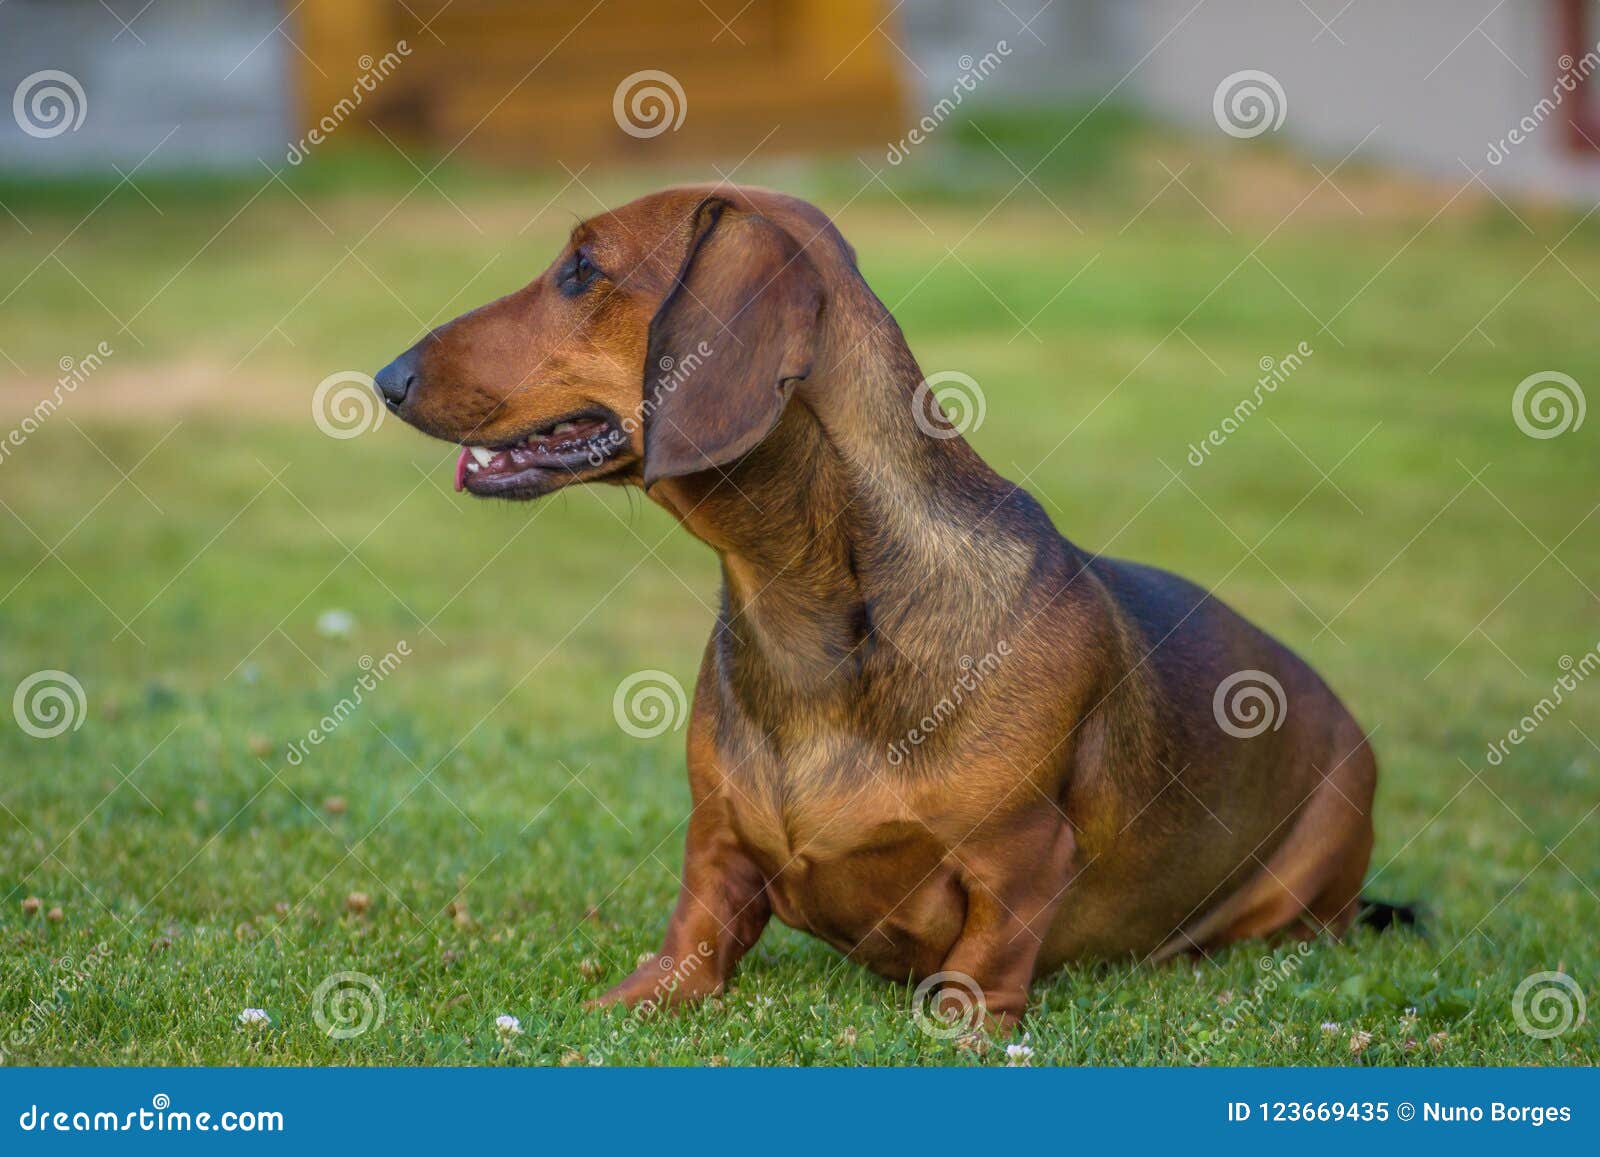 Cute dog on green lawn stock image. Image of black, forest - 123669435